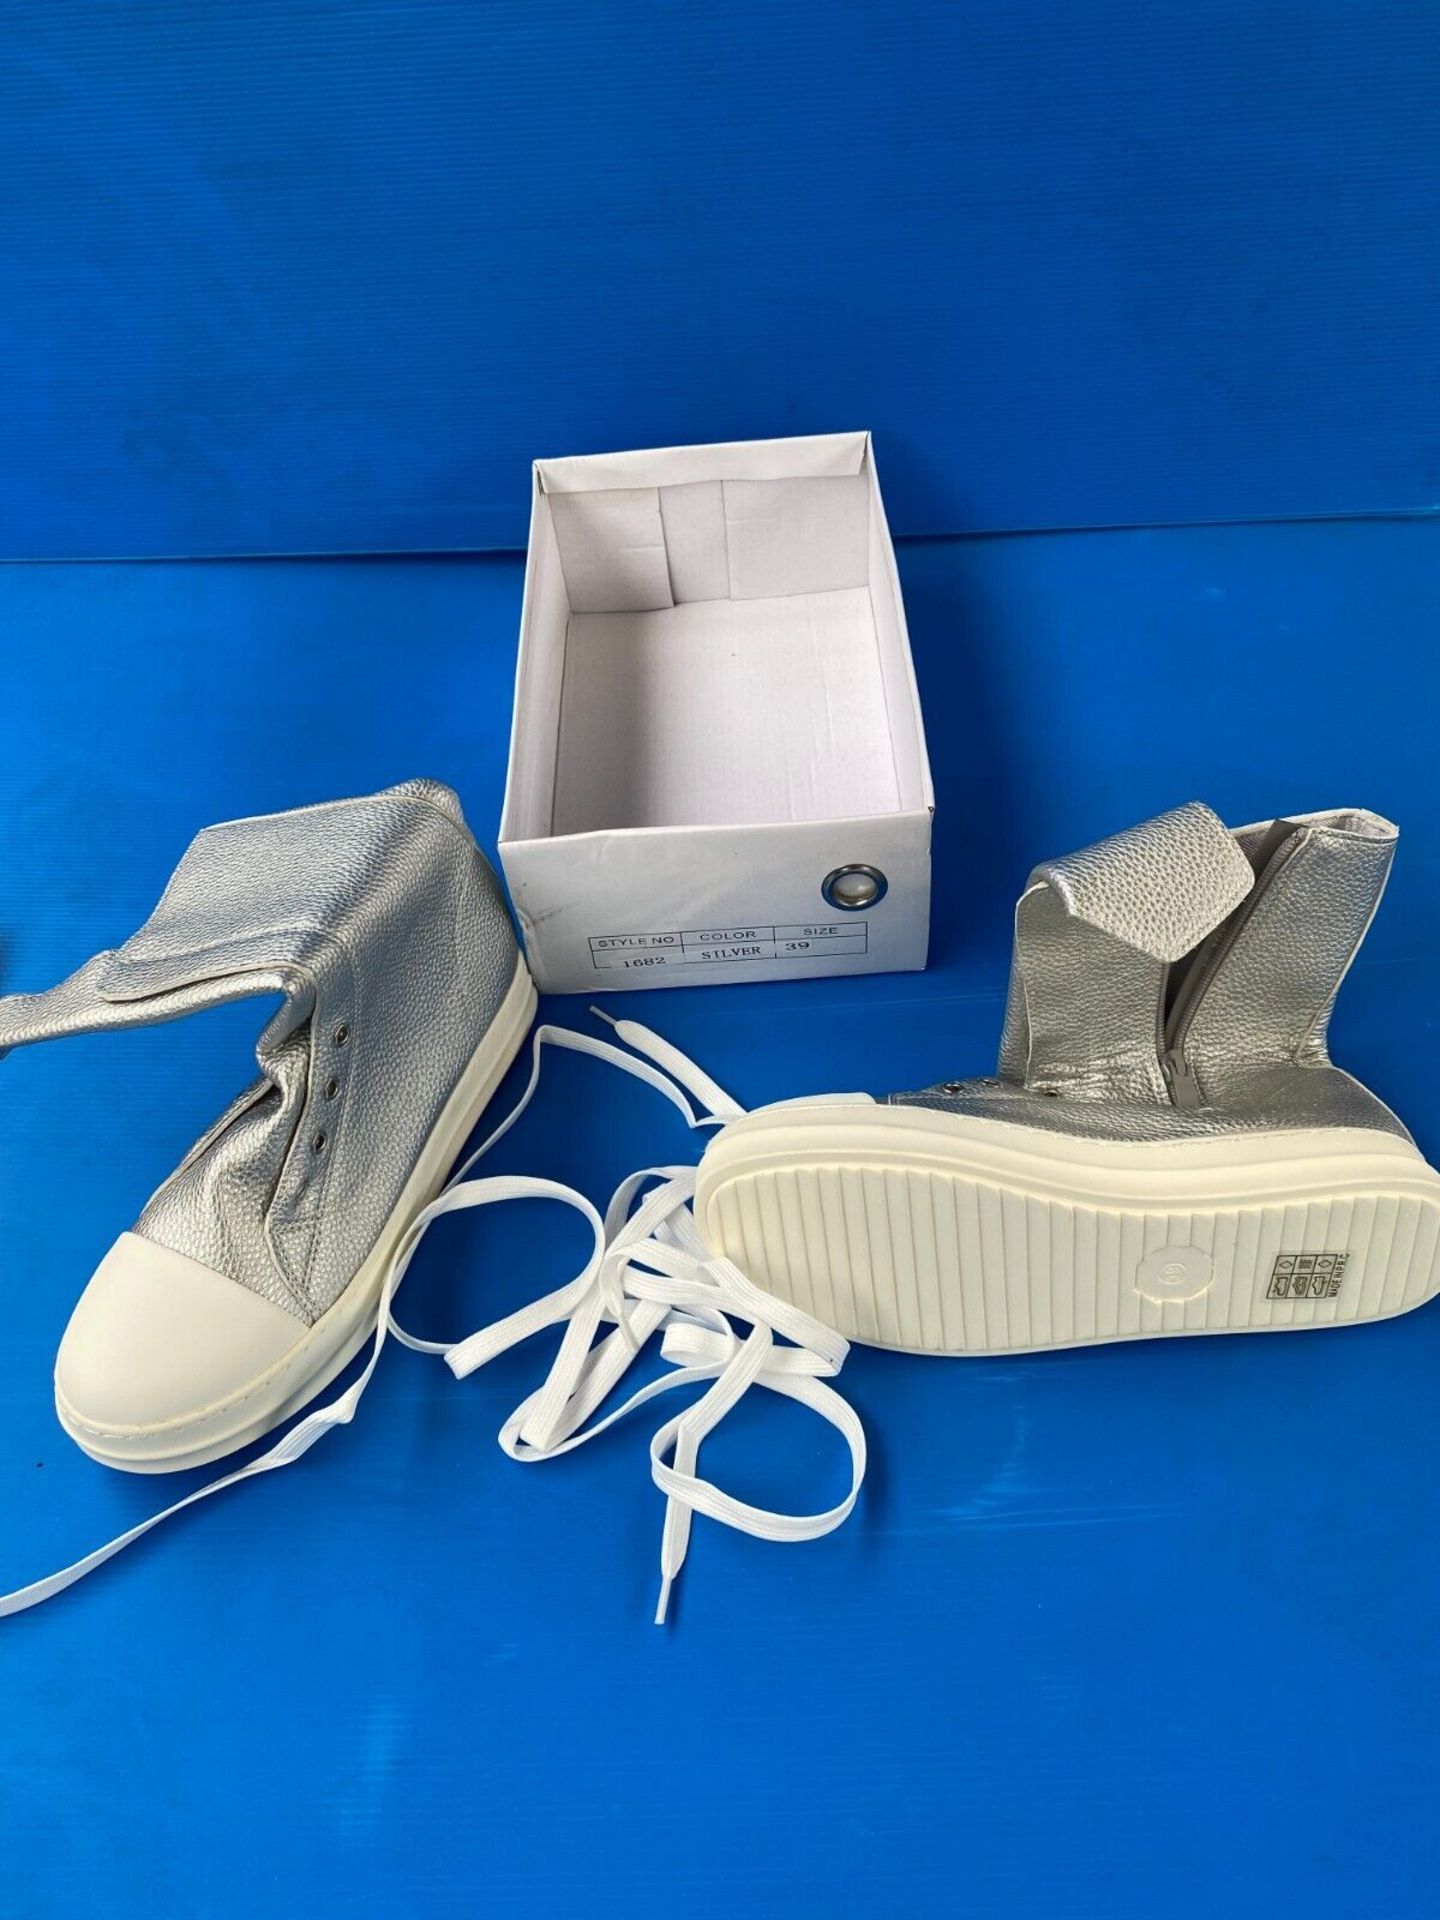 X50 BRAND NEW PAIRS WOMENS TRAINERS - MIXED STYLES AND SIZES RRP £1250 - Image 3 of 5